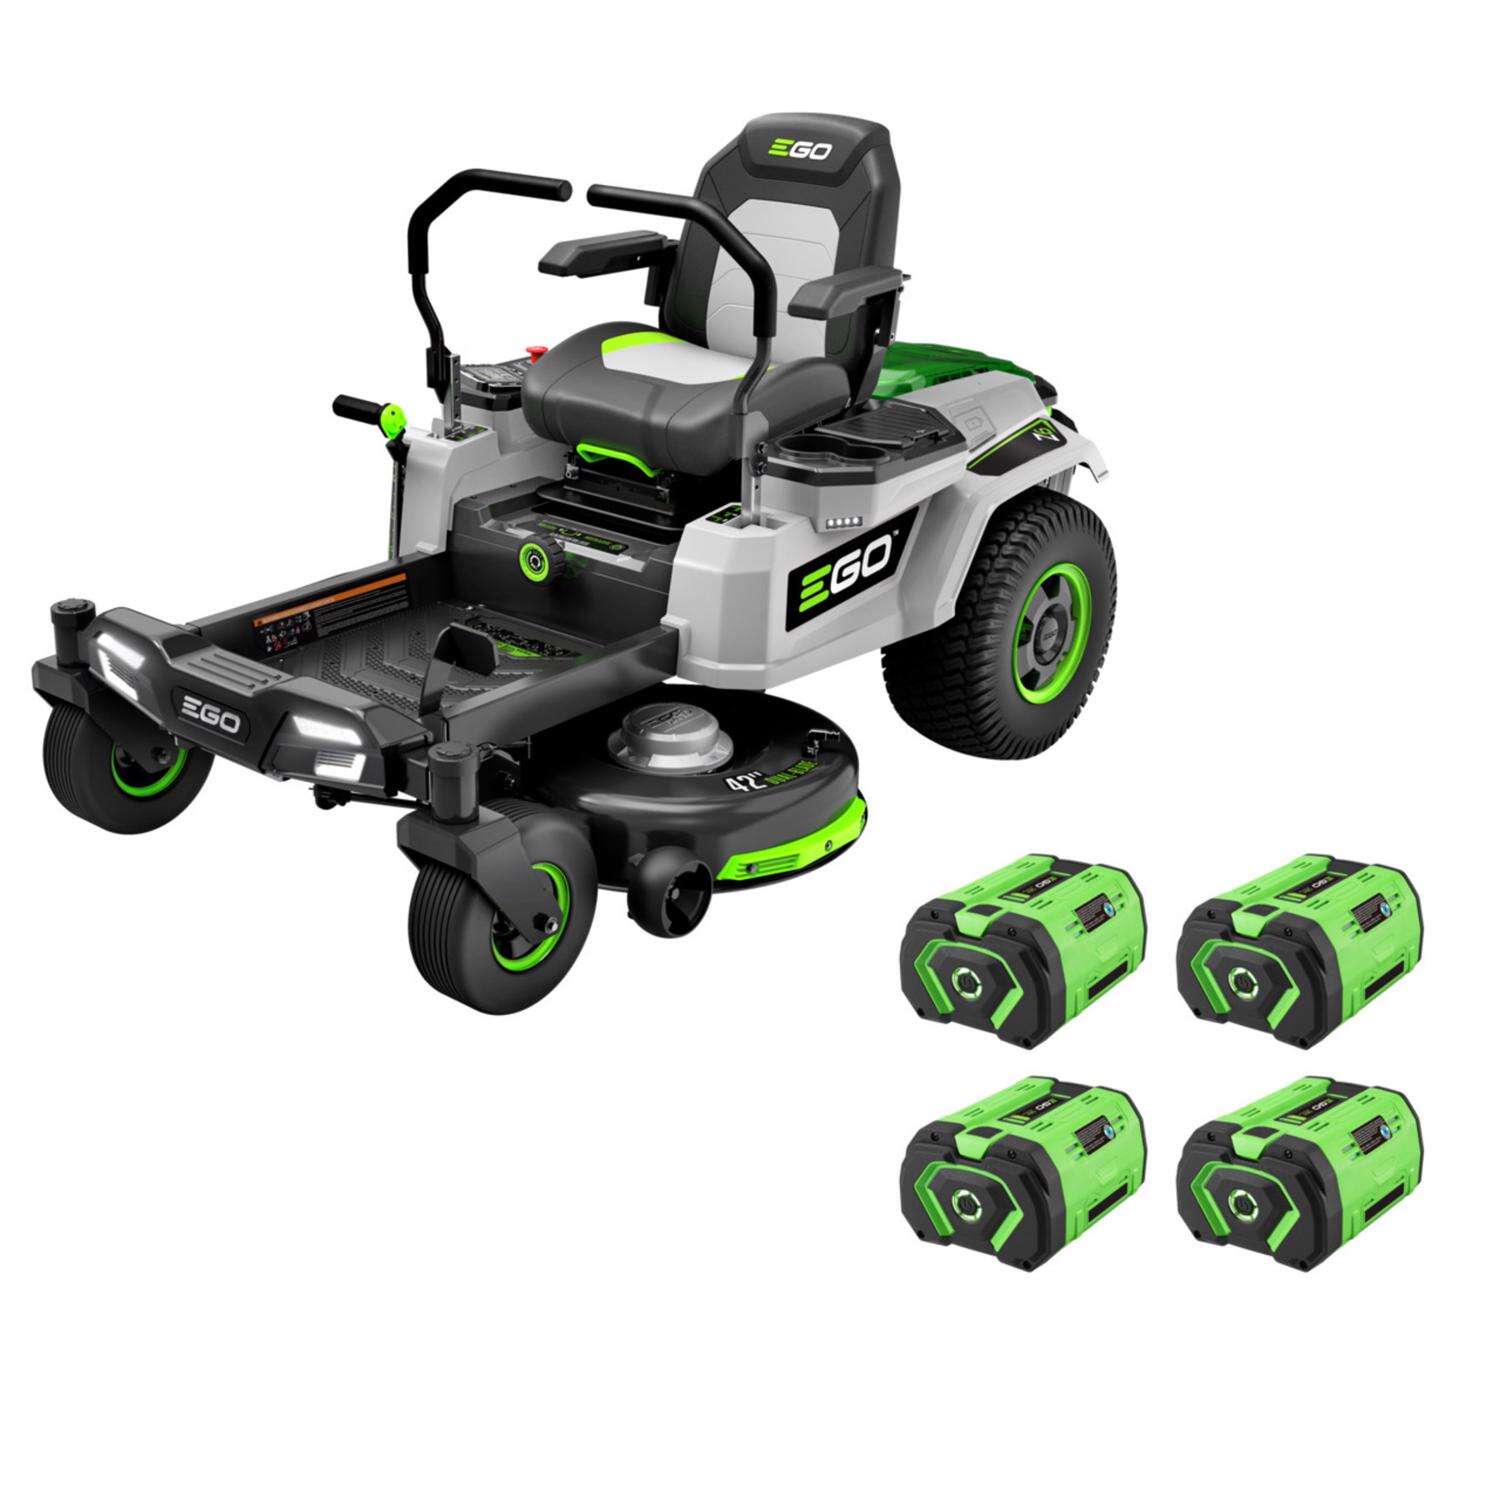 Two Top-Rated Lawn Mowers Are on Sale at Ace